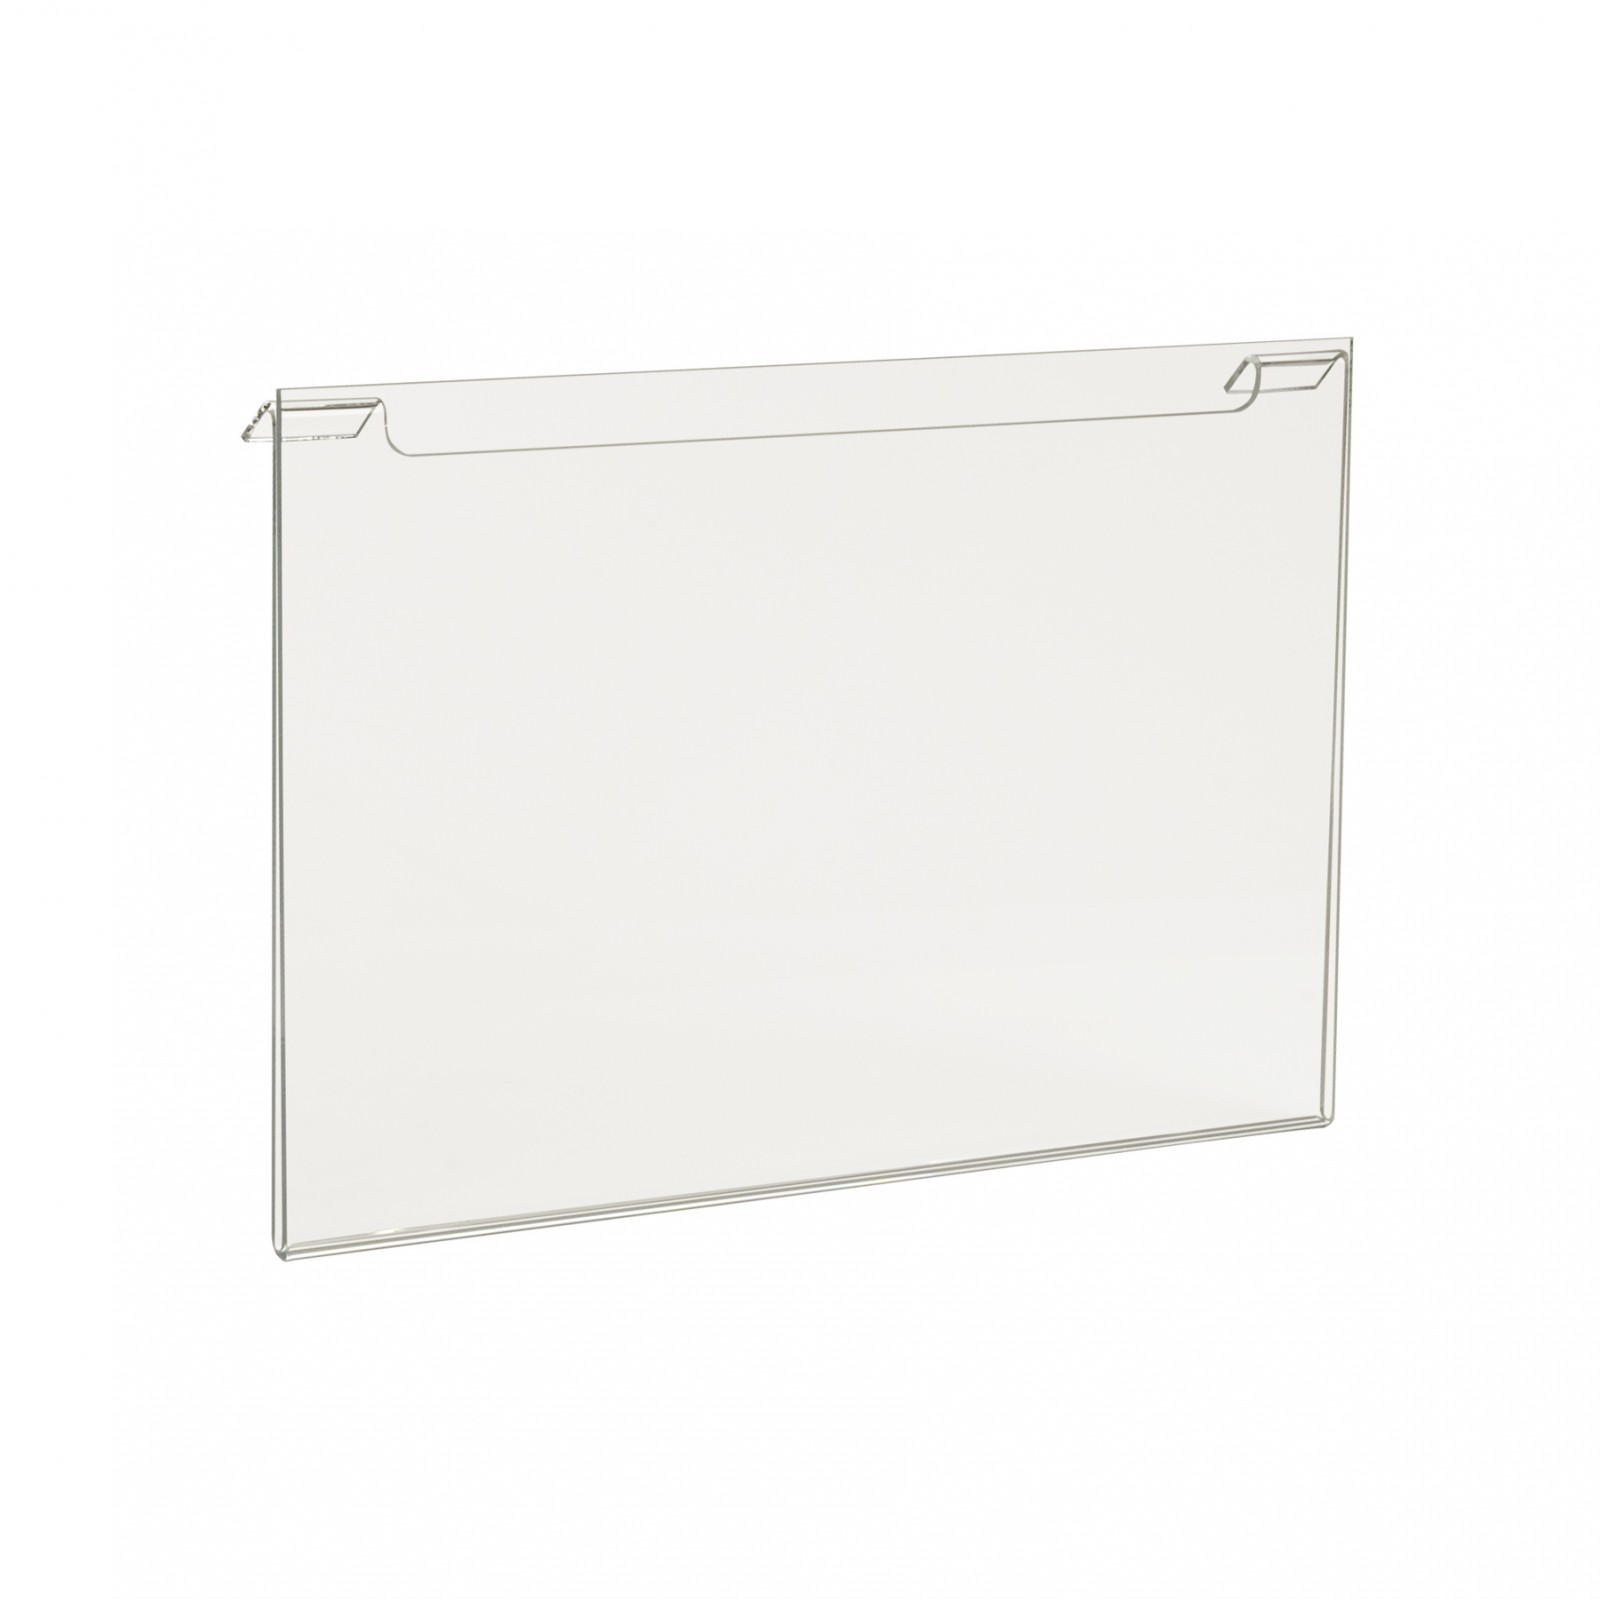 Acrylic Sign Holder for Gridwall or Slatwall 7"h x 11"w